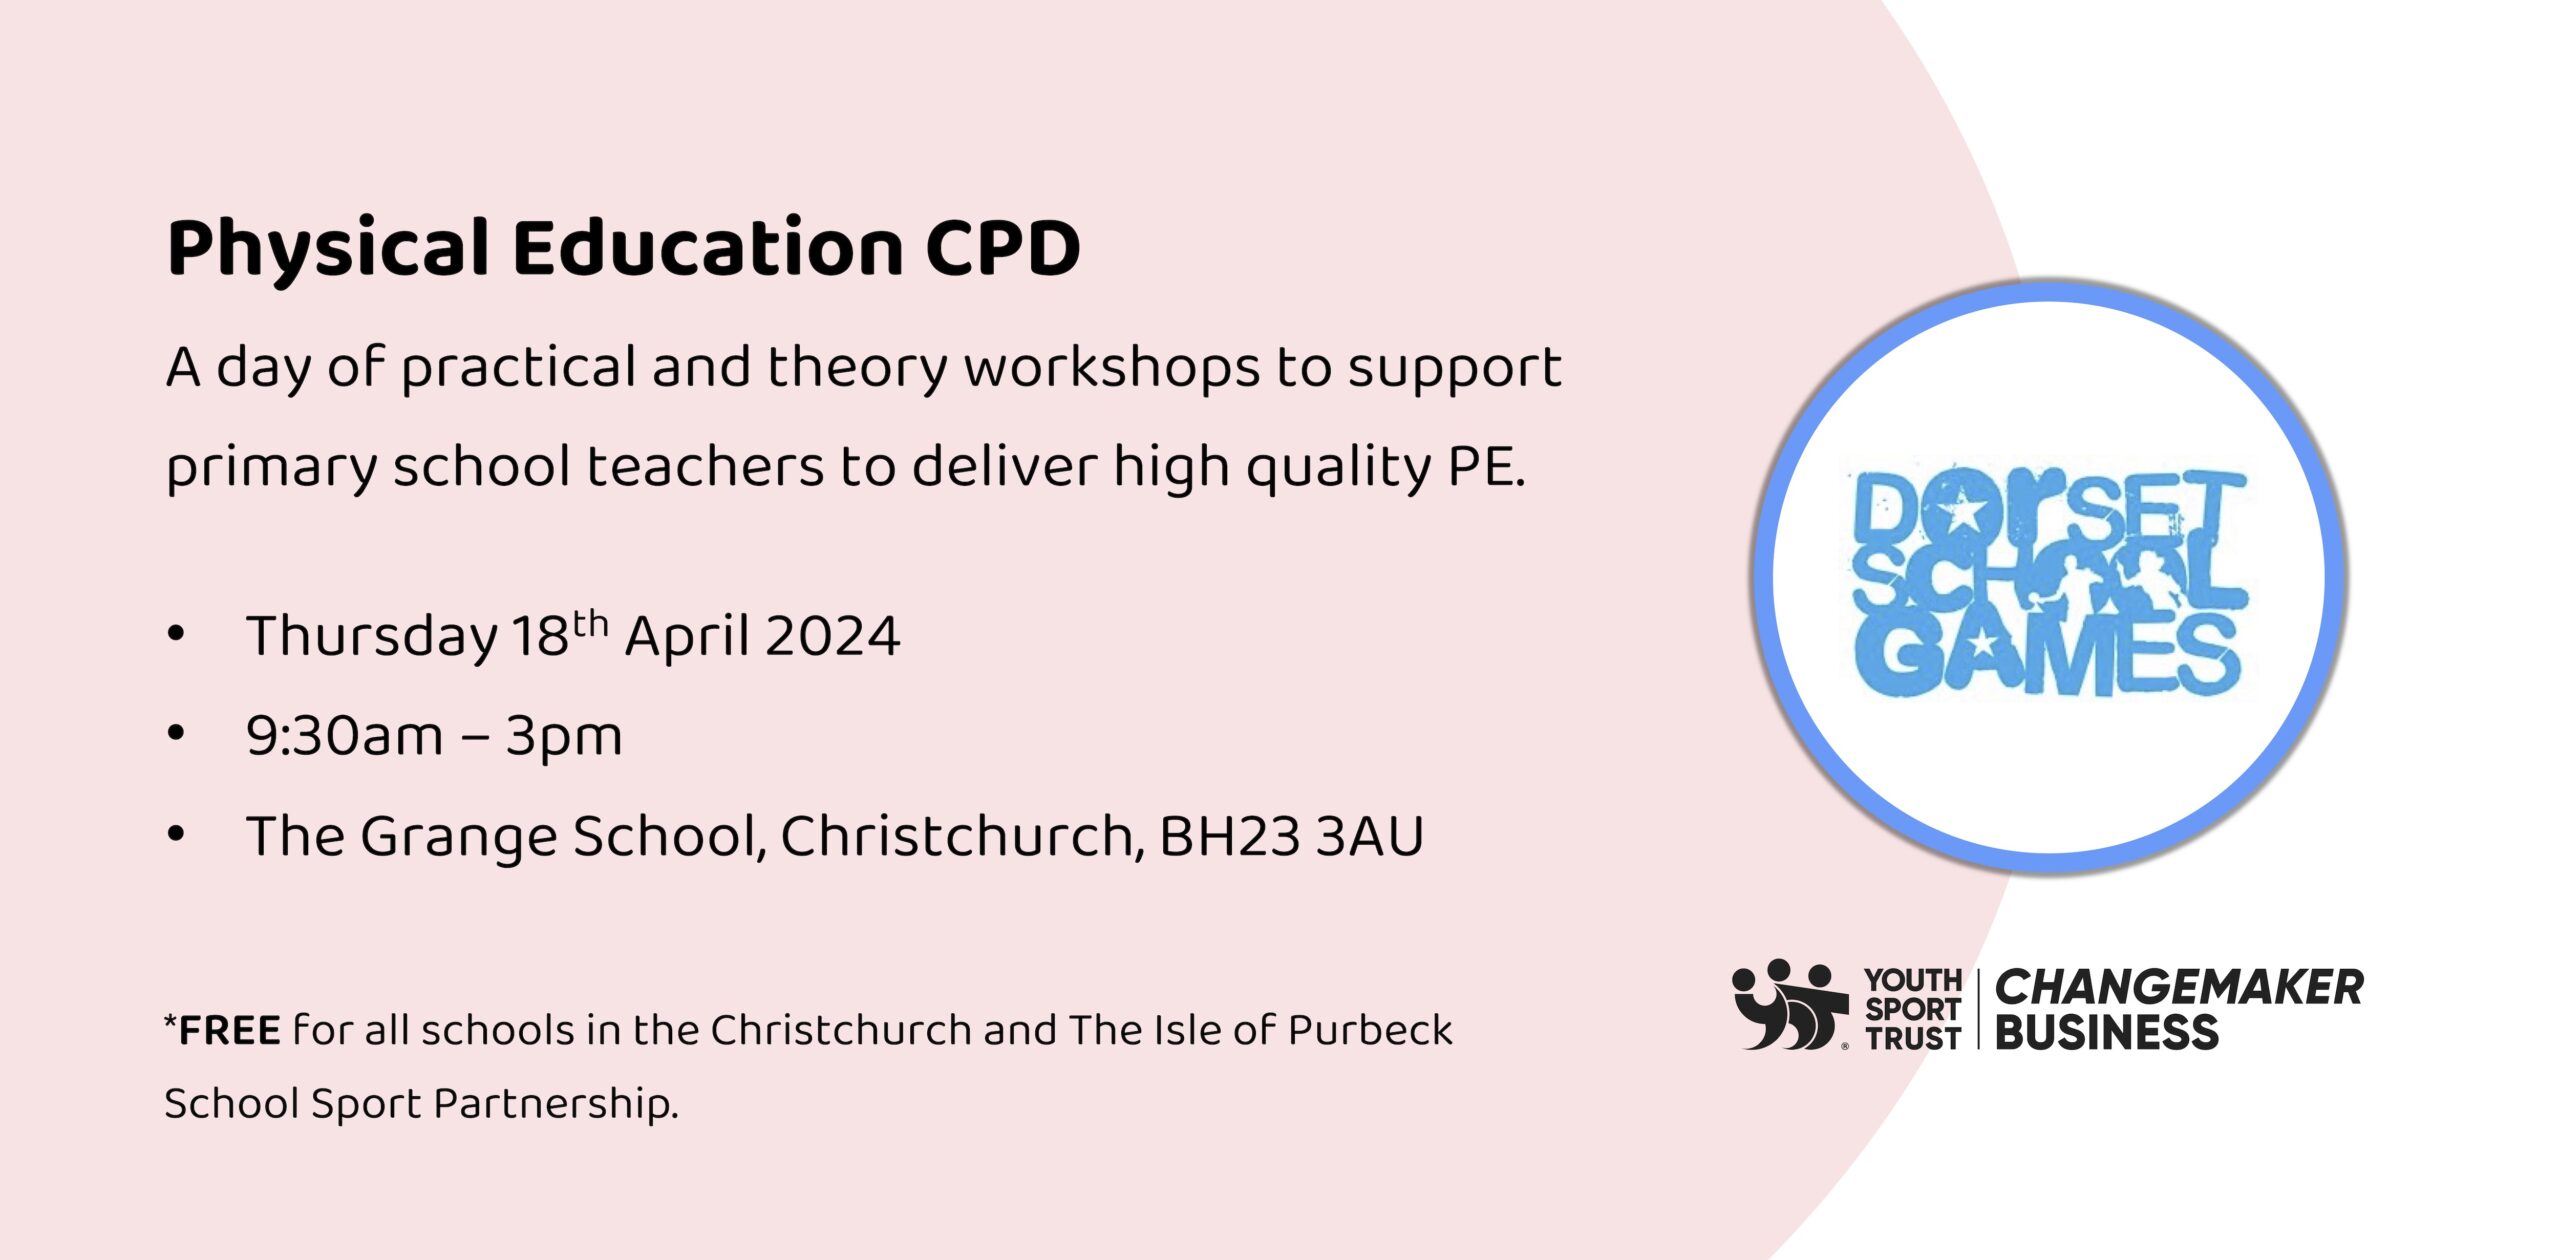 Dorset | Physical Education CPD